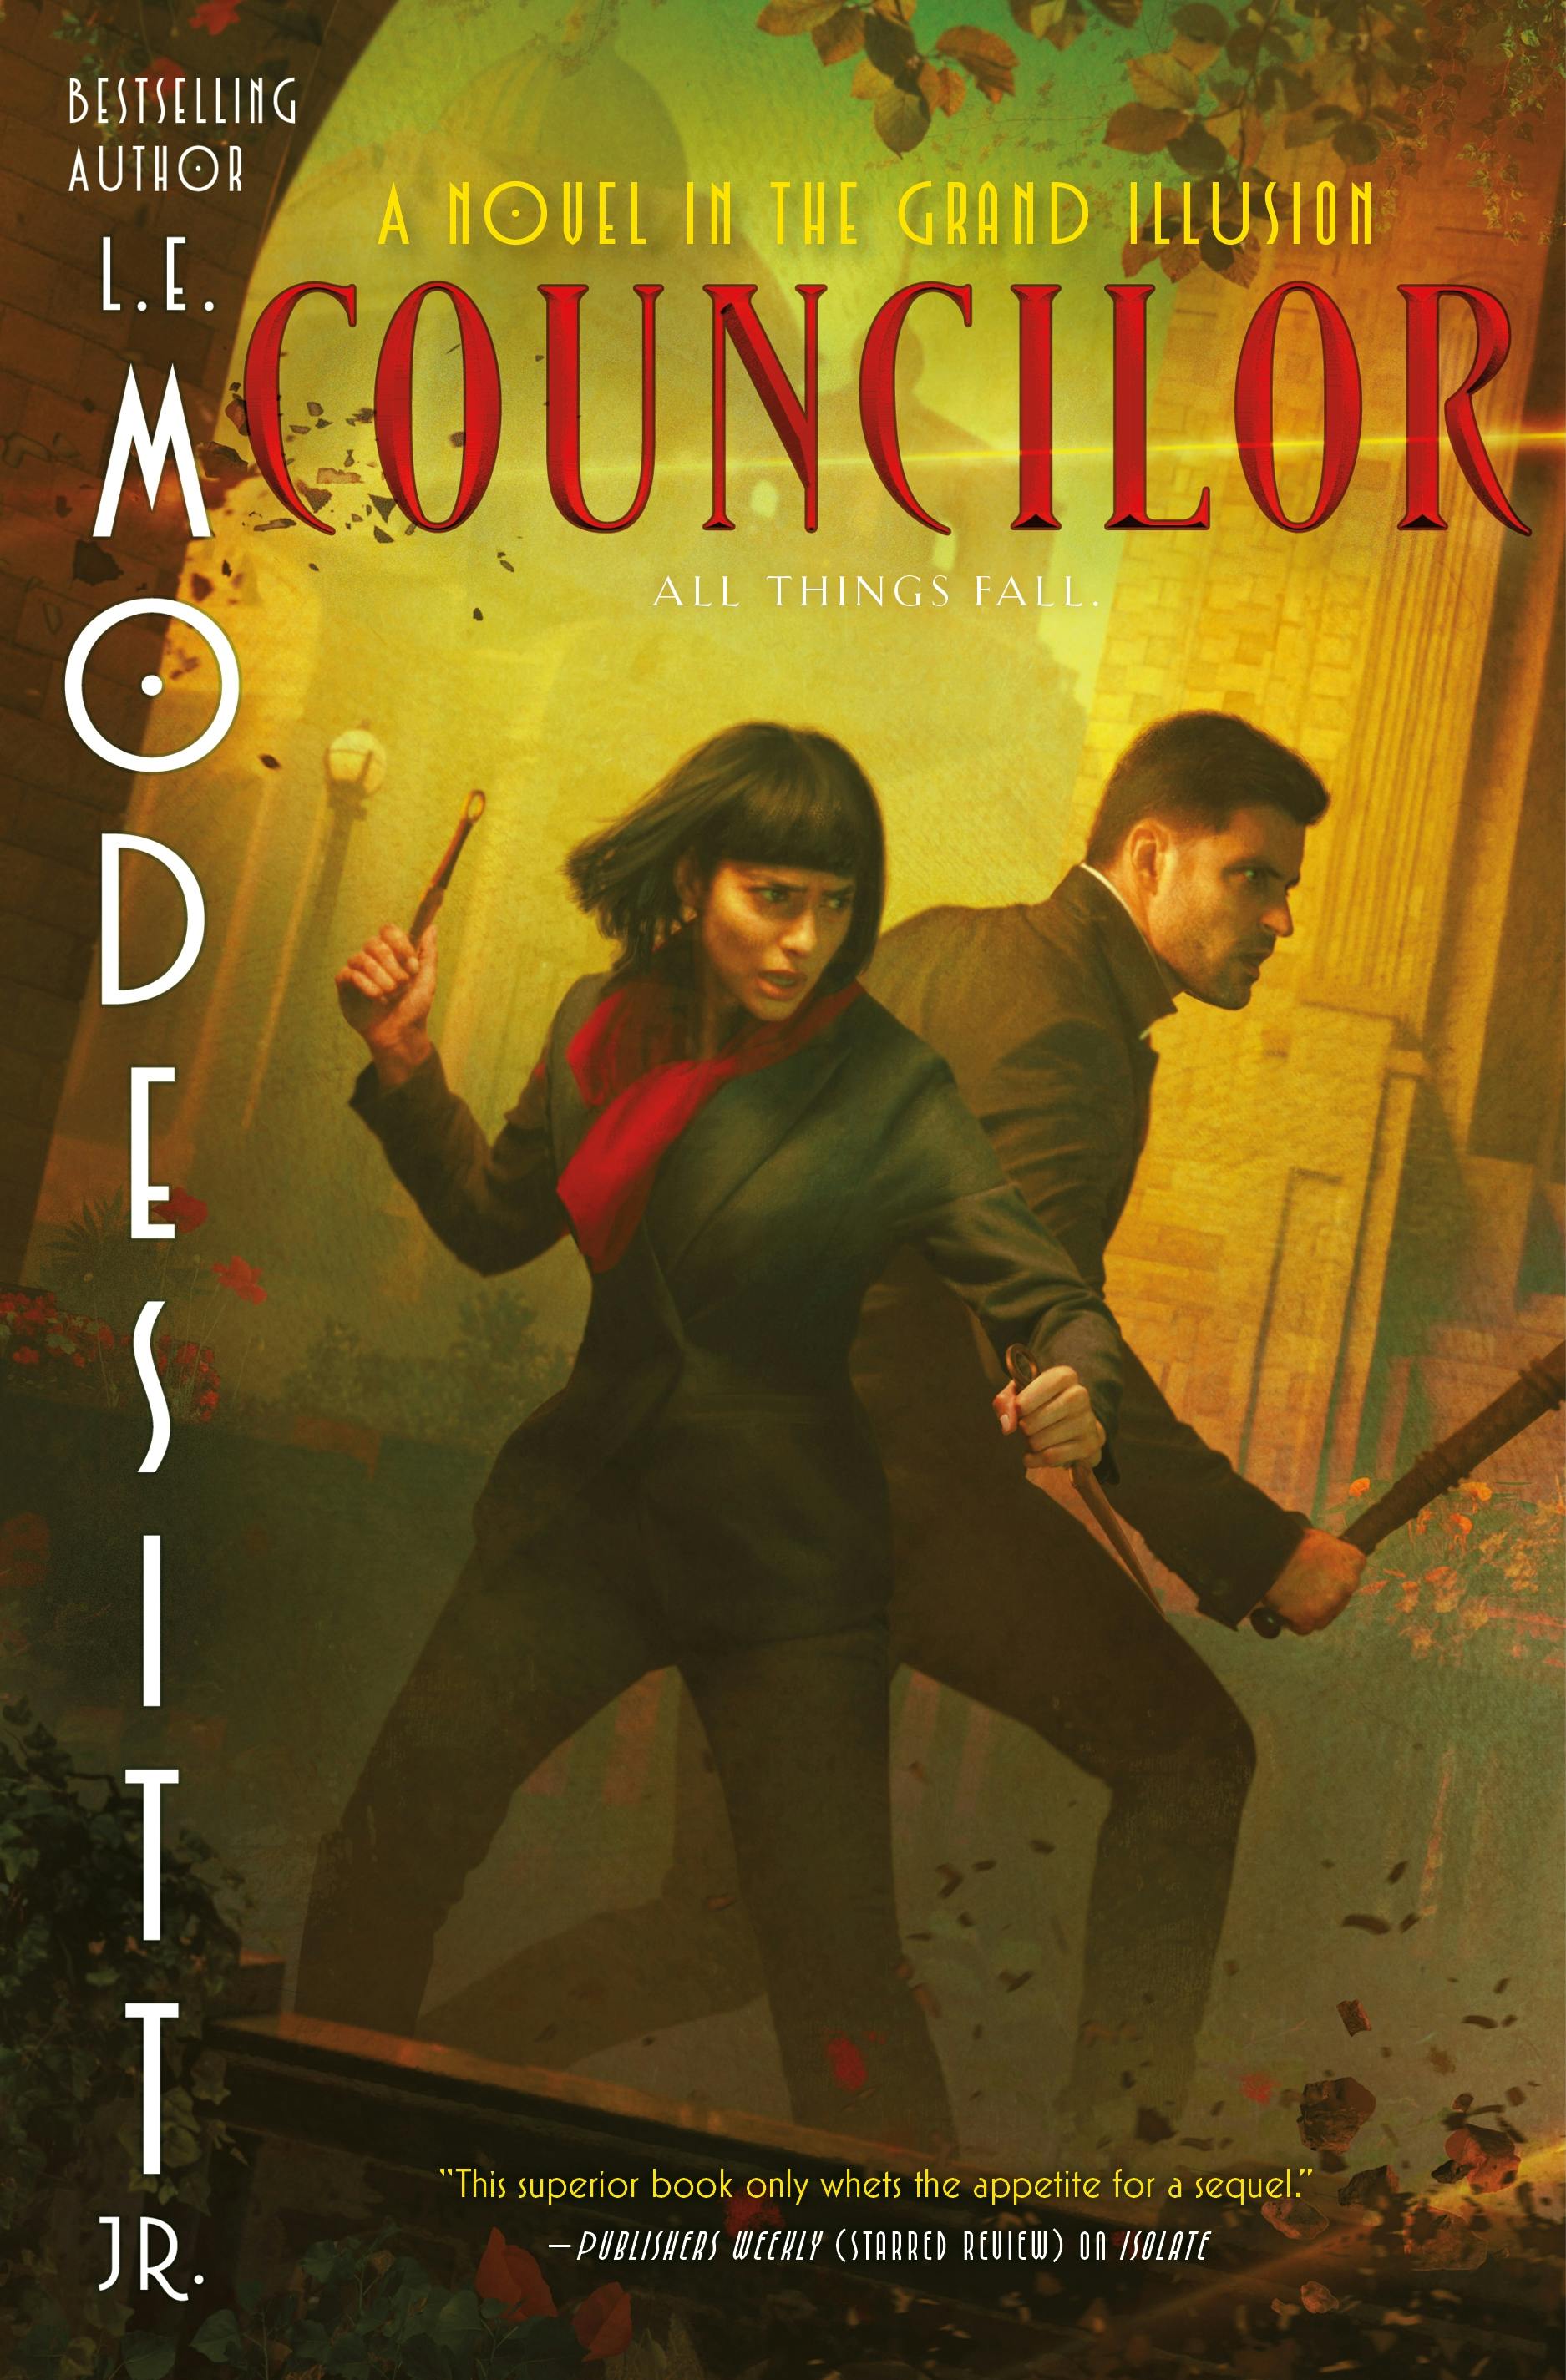 Cover for the book titled as: Councilor